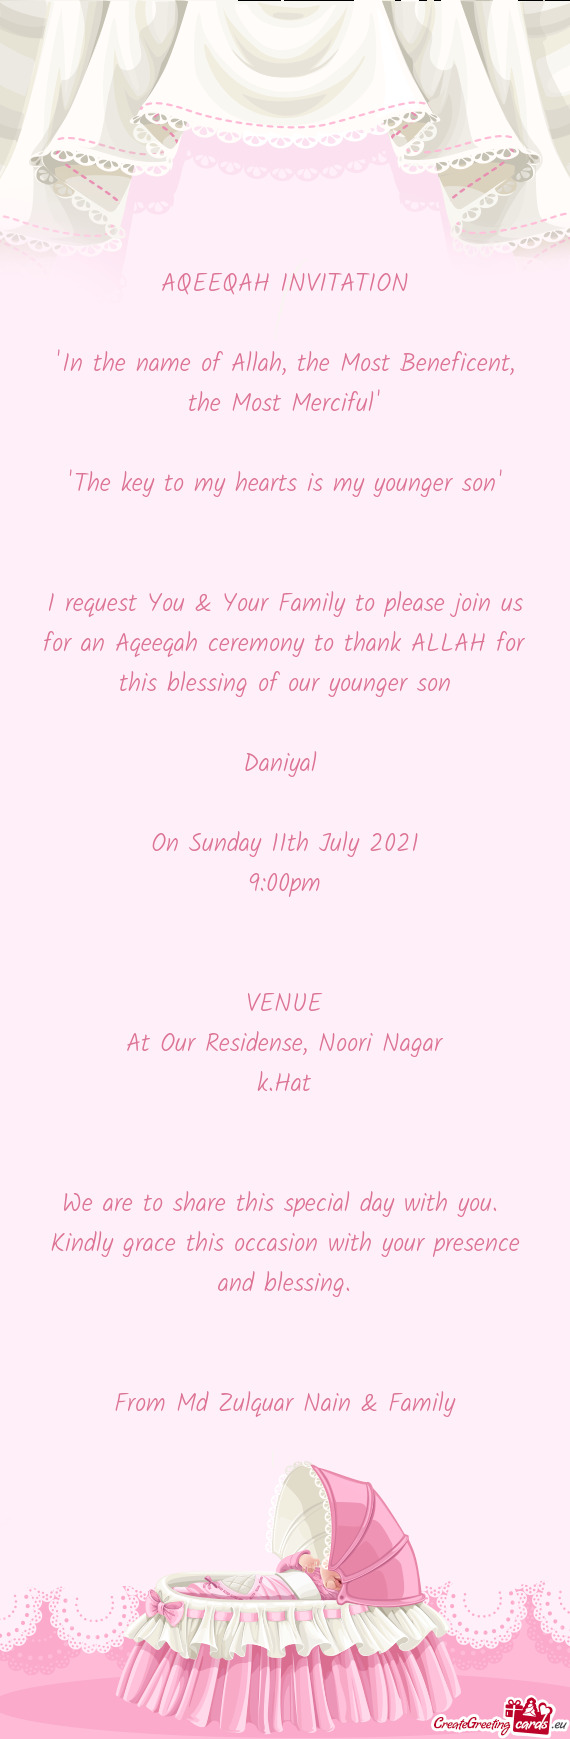 The Most Merciful"
 
 "The key to my hearts is my younger son"
 
 
 I request You & Your Family to